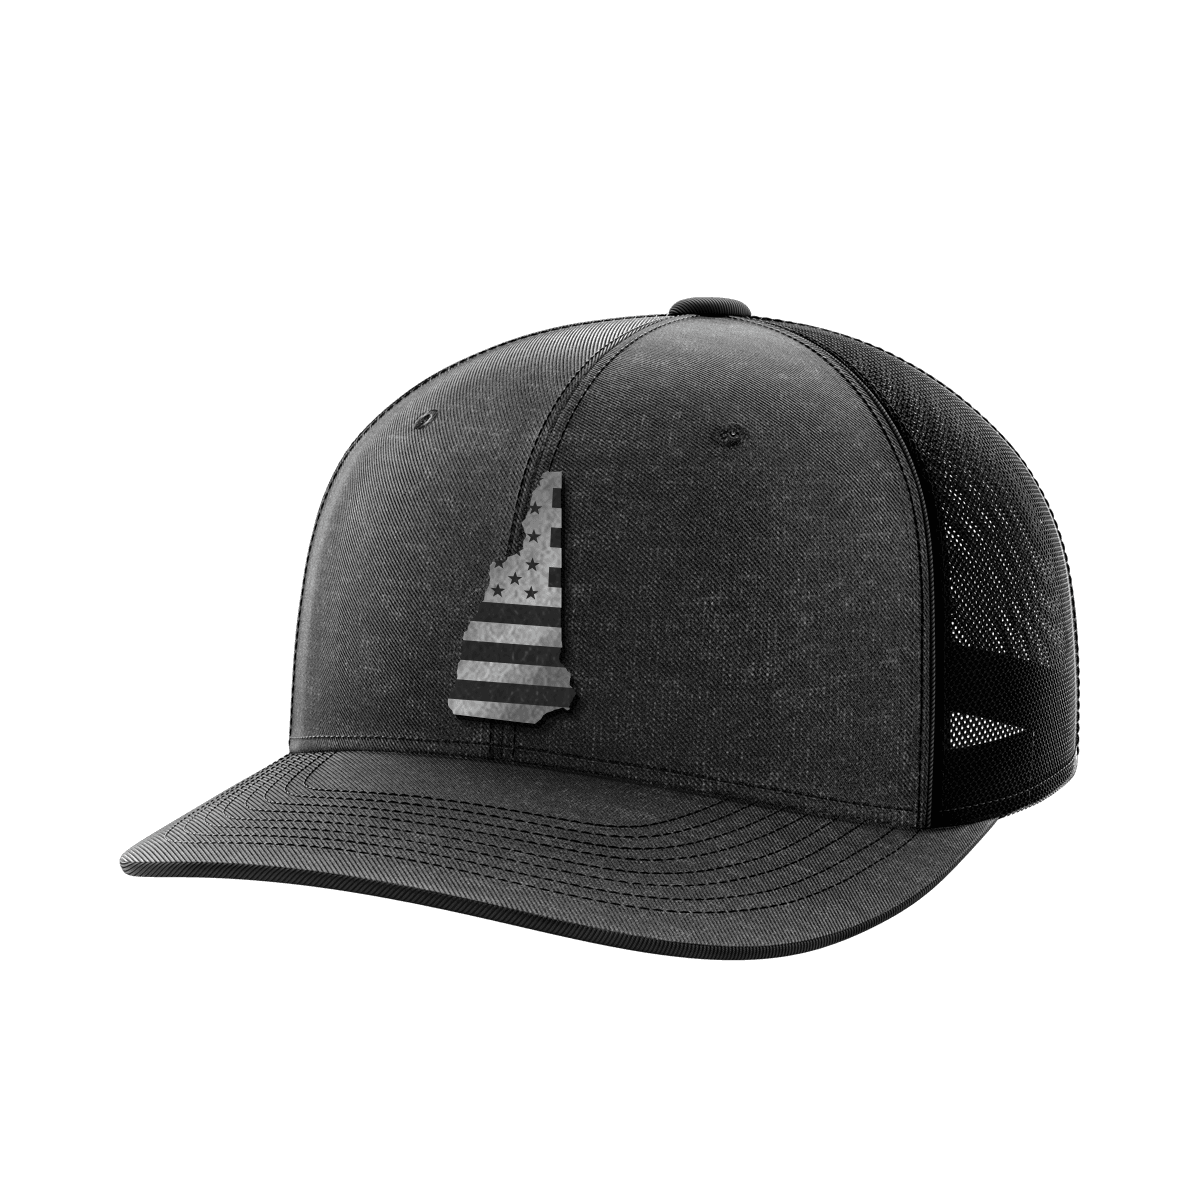 New Hampshire United Collection (black leather) - Greater Half